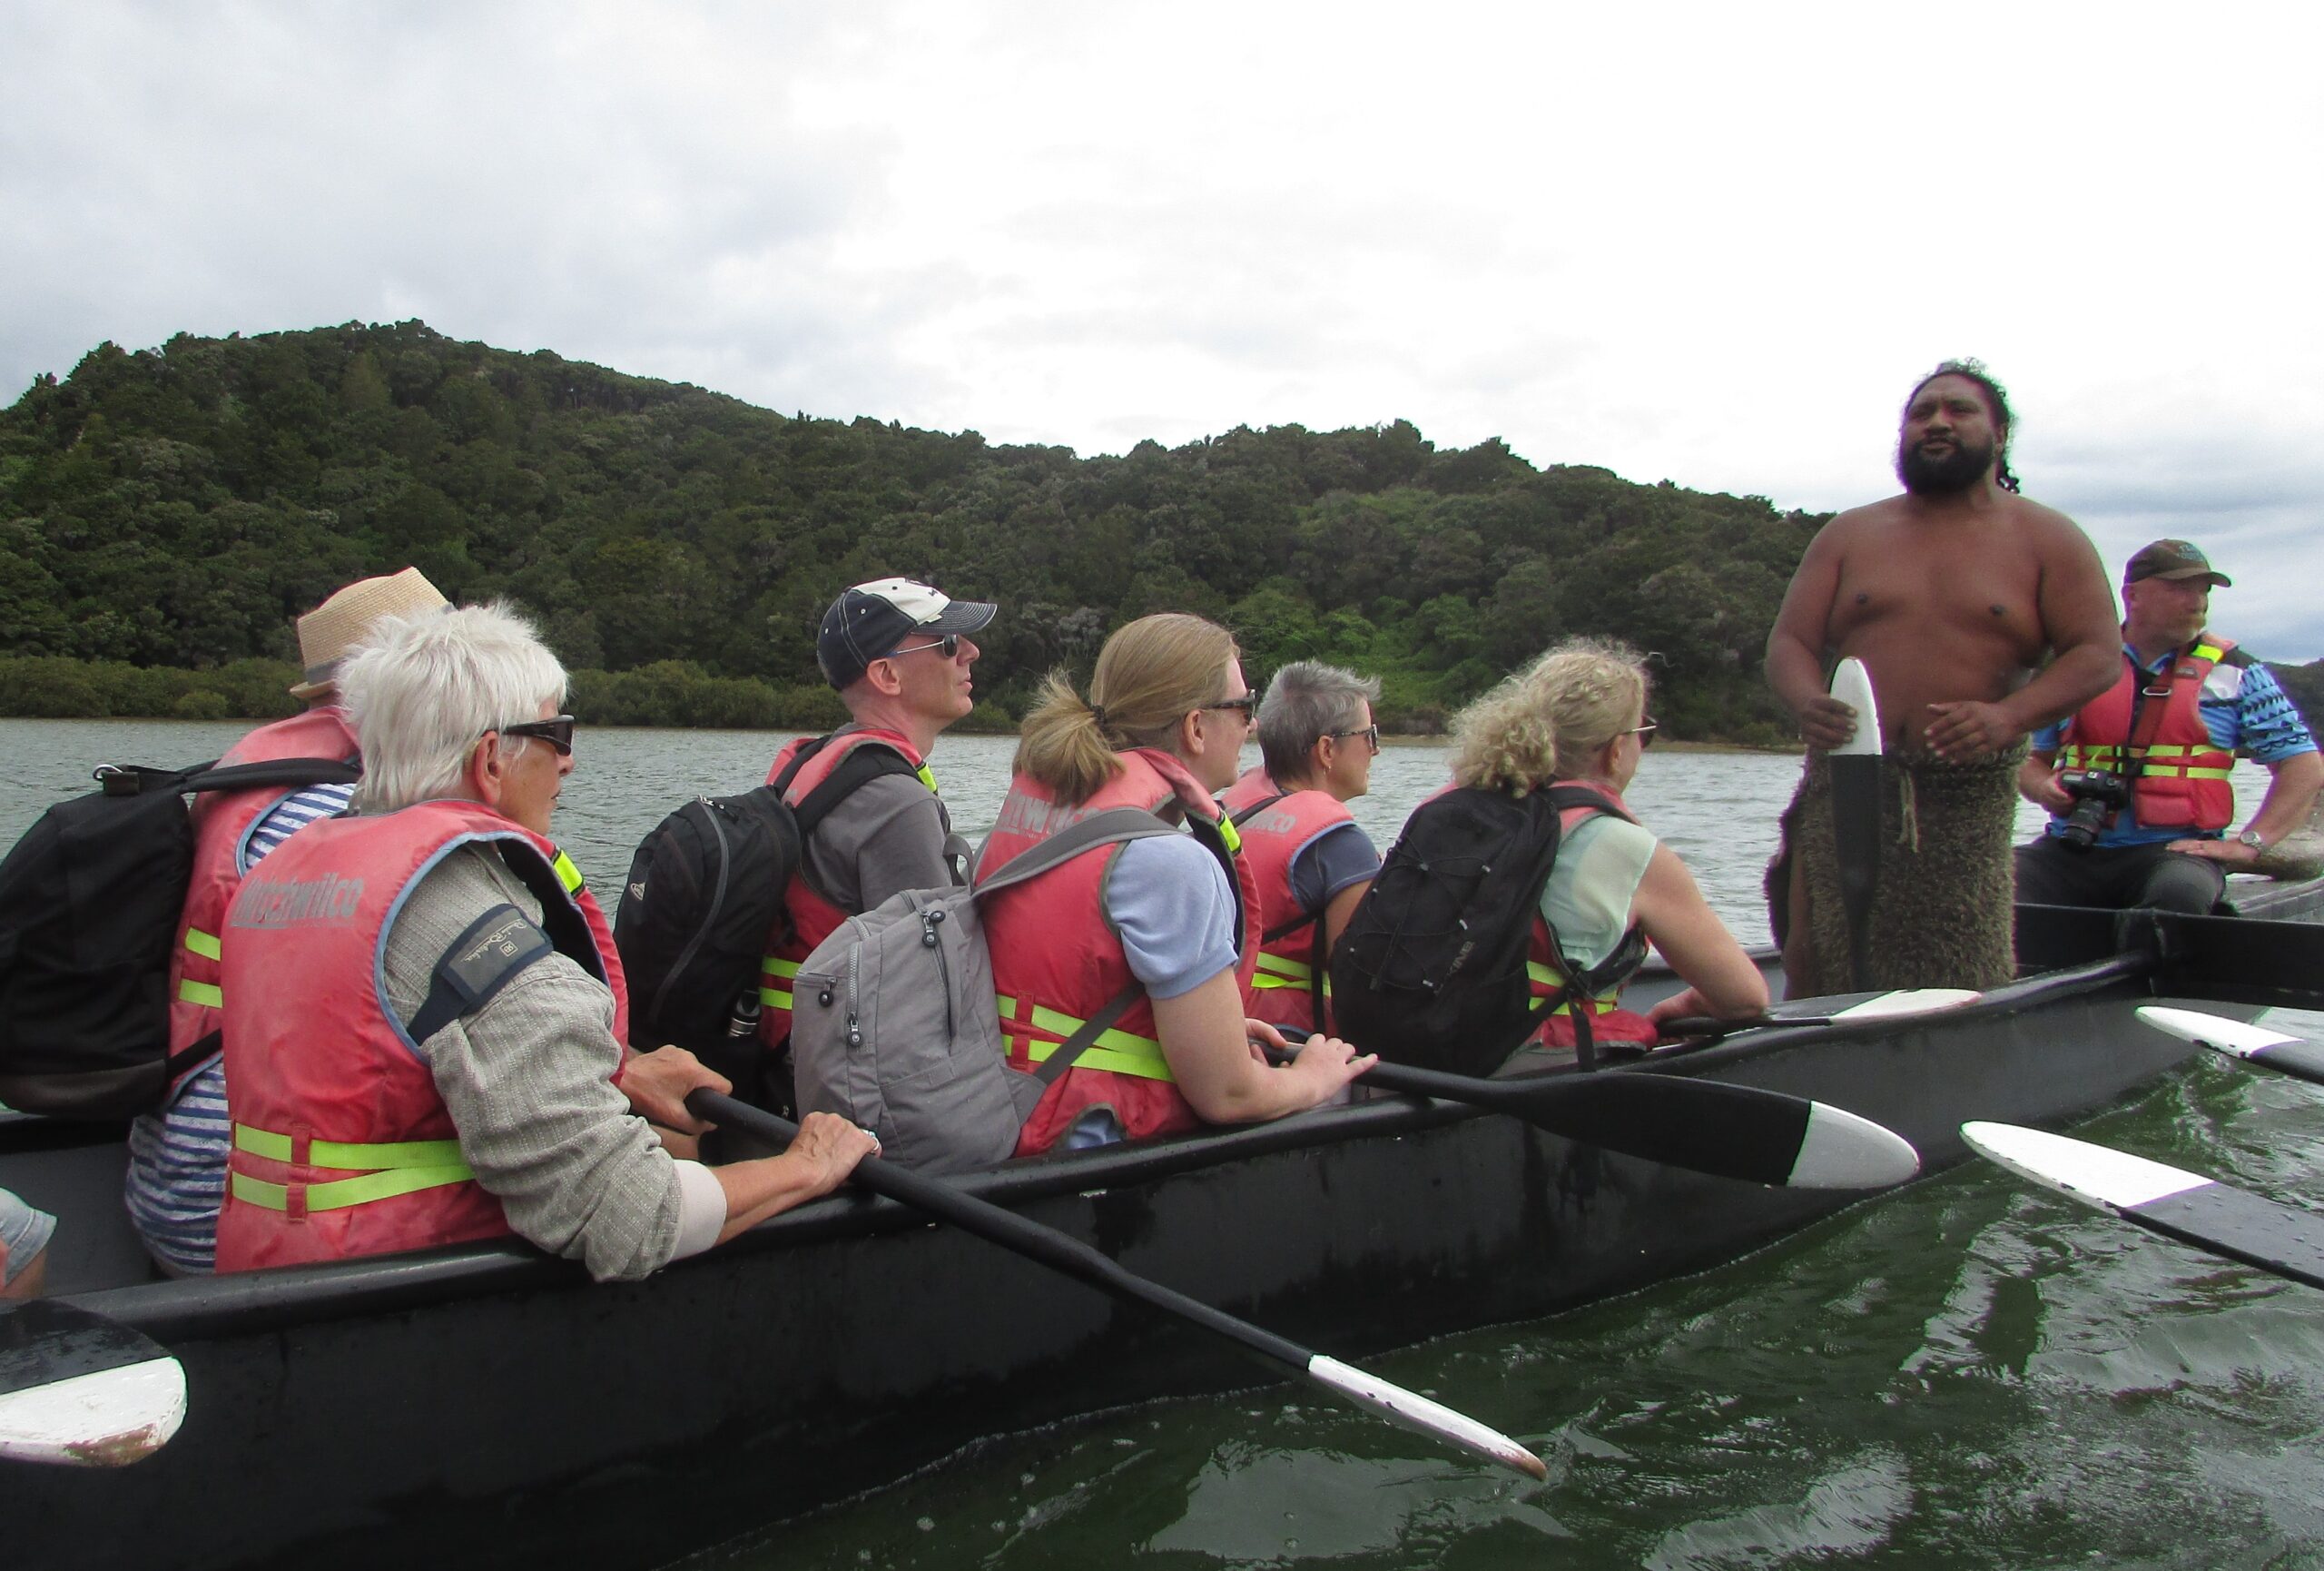 A pause in paddling while waka master Rob tells a story (2)